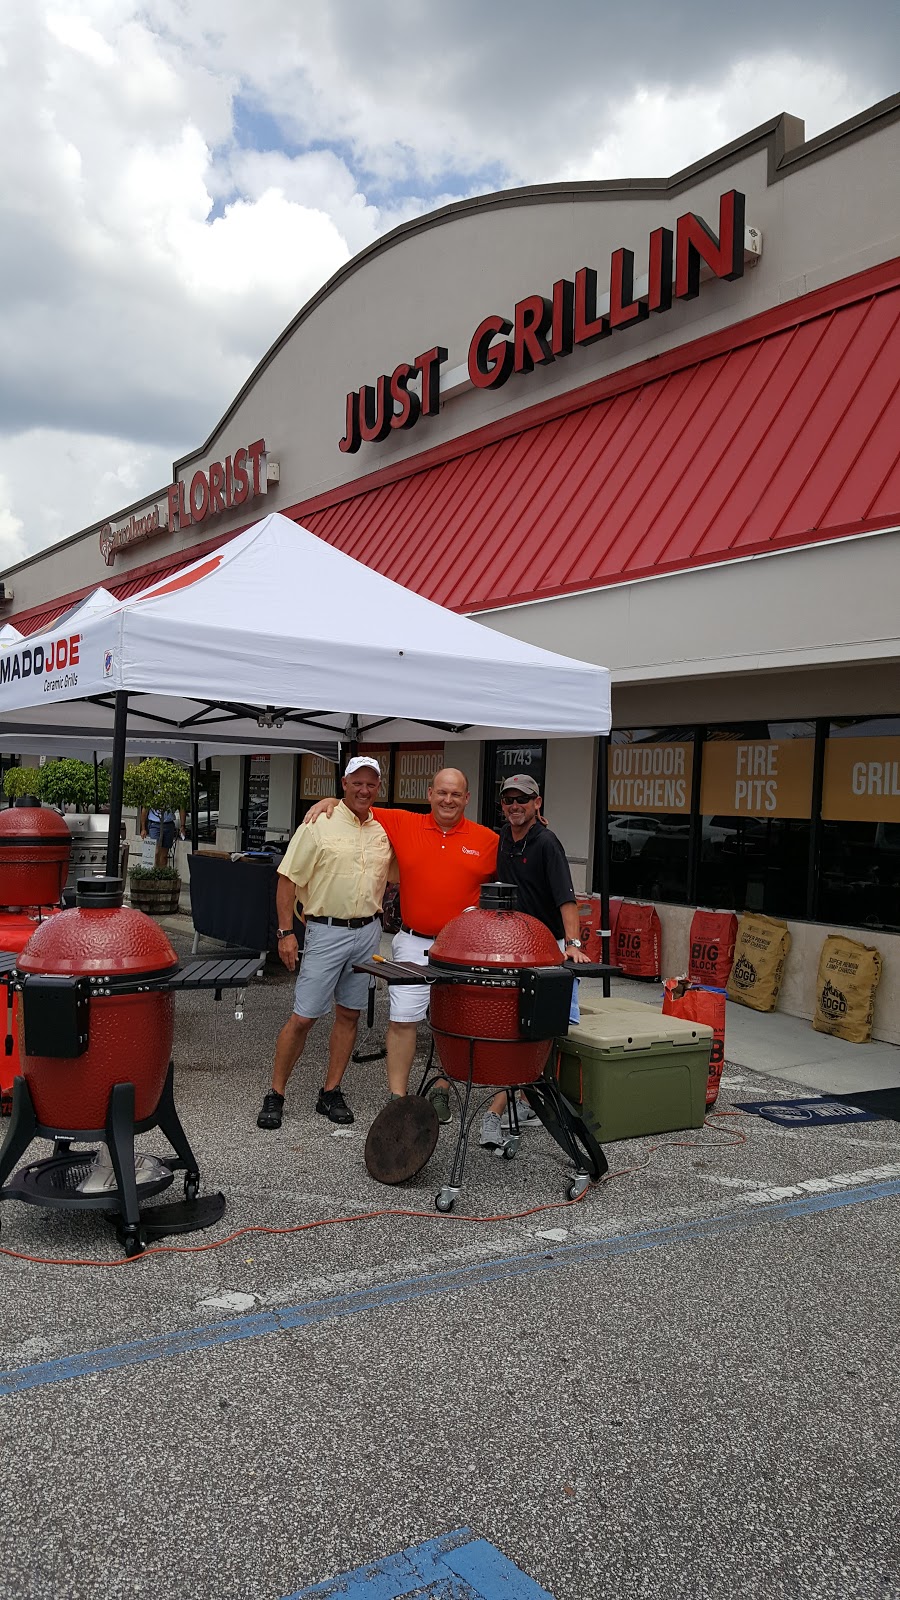 Just Grillin Outdoor Living | 11743 N Dale Mabry Hwy, Tampa, FL 33618, USA | Phone: (813) 962-1700